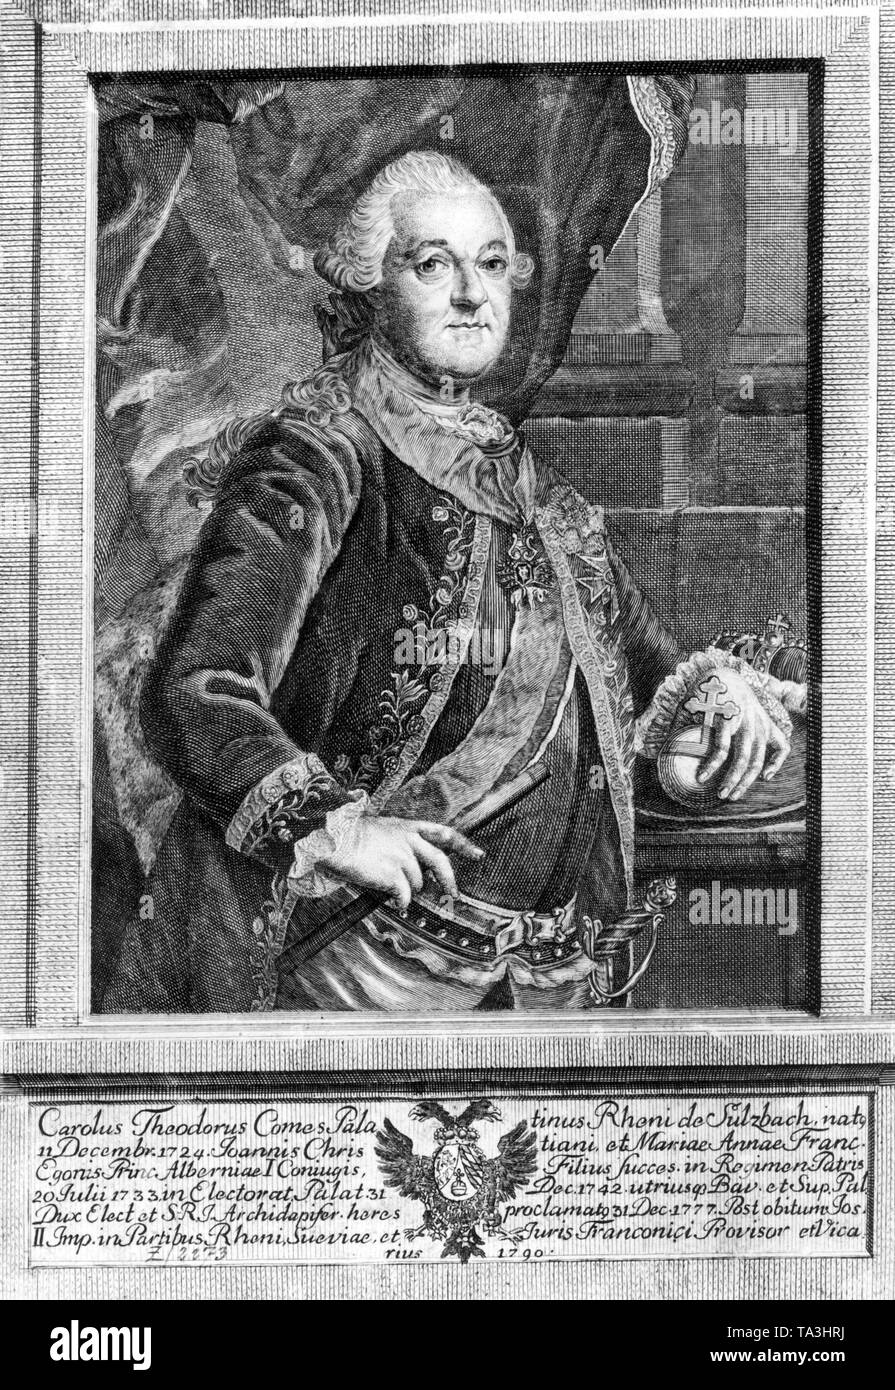 This painting is a portrait of Charles Theodore, Elector of Bavaria and Count Palatine. He was devoted to music and arts. In 1781 he favored the premiere of Mozart's 'Idomeneo' in Munich. Under his reign, there were enormous cultural, economic and infrastructural developments in southern Germany. Stock Photo